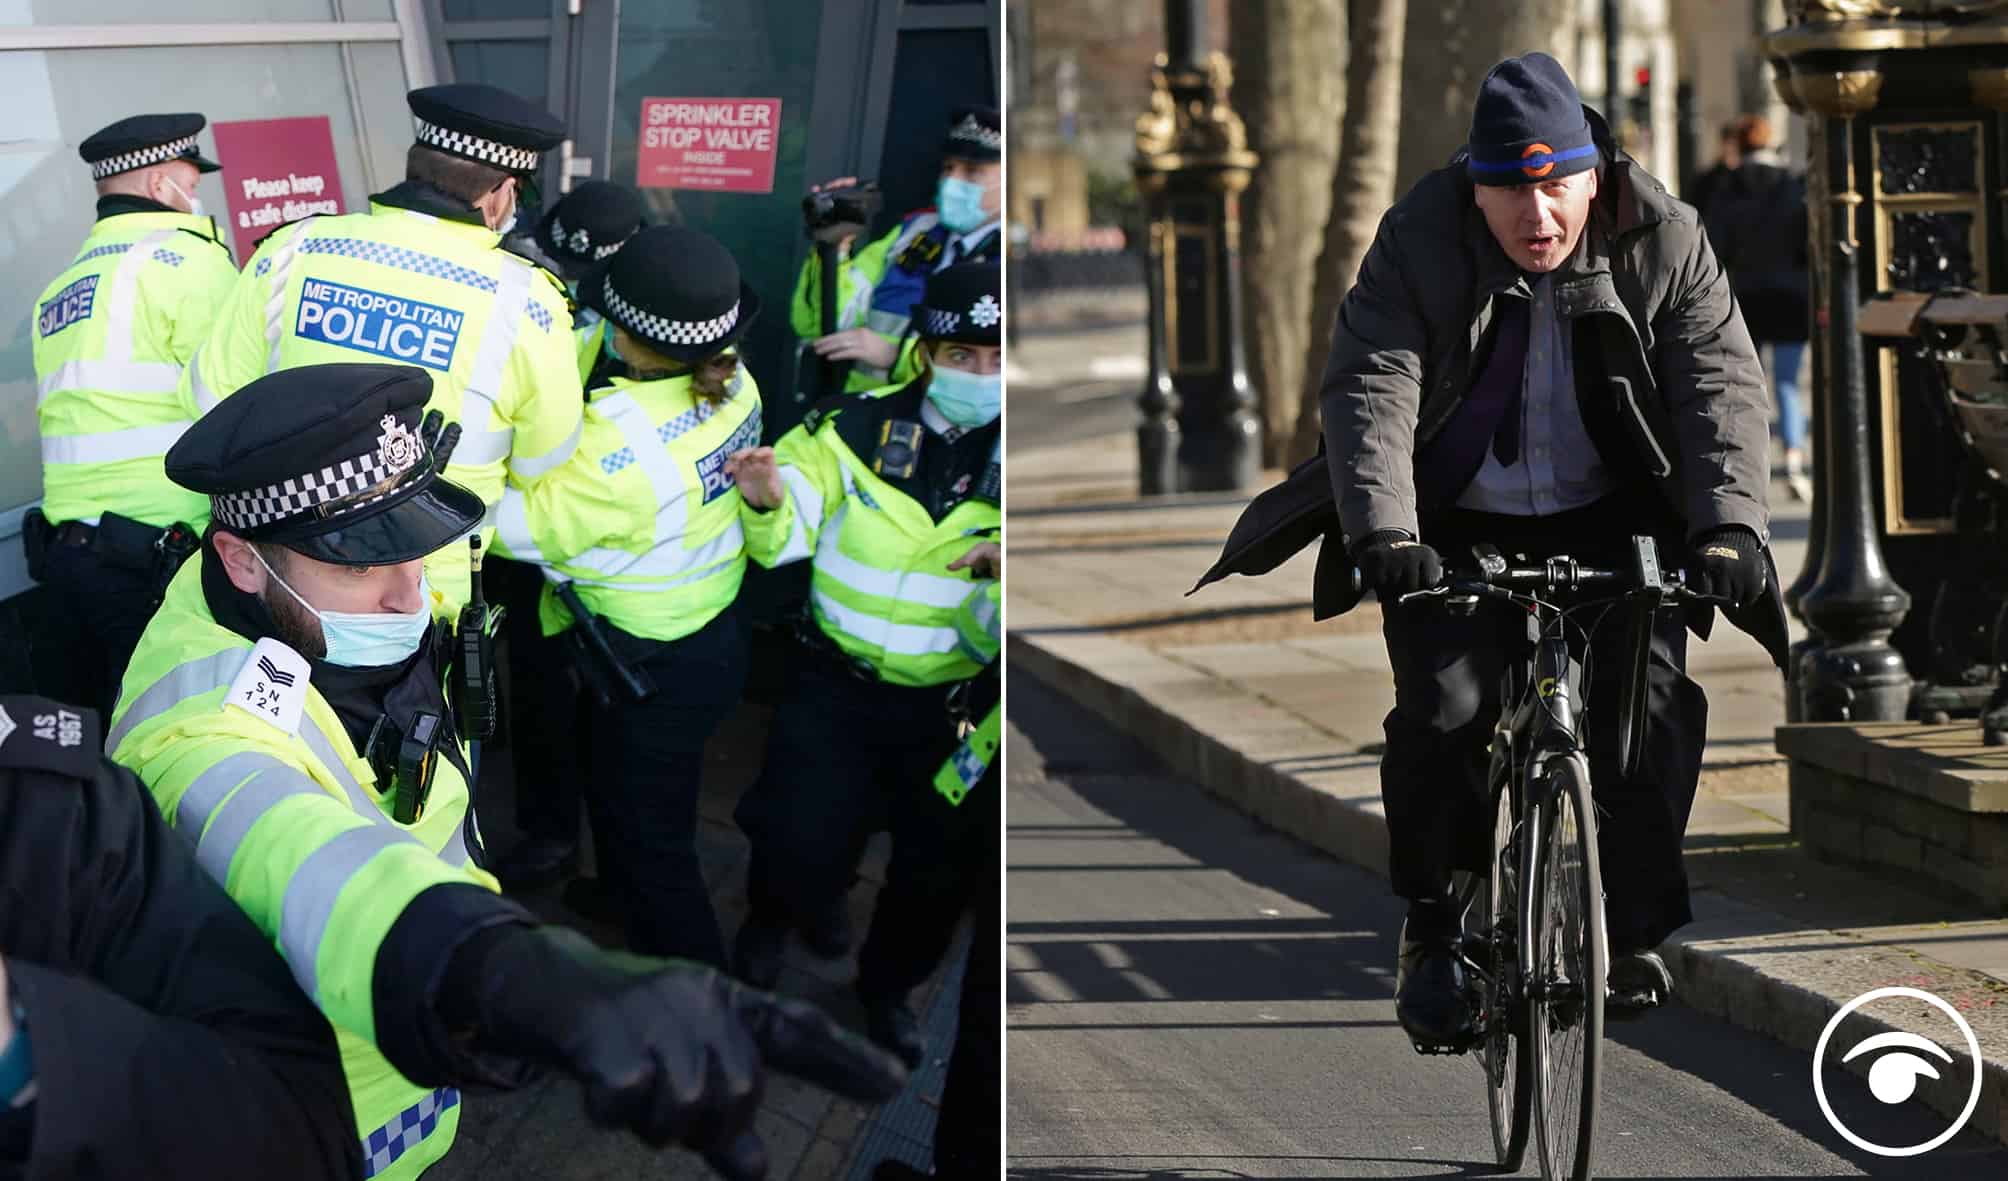 Watch: Police to clamp down ‘swiftly’ on lockdown breaches but say PM didn’t break rules